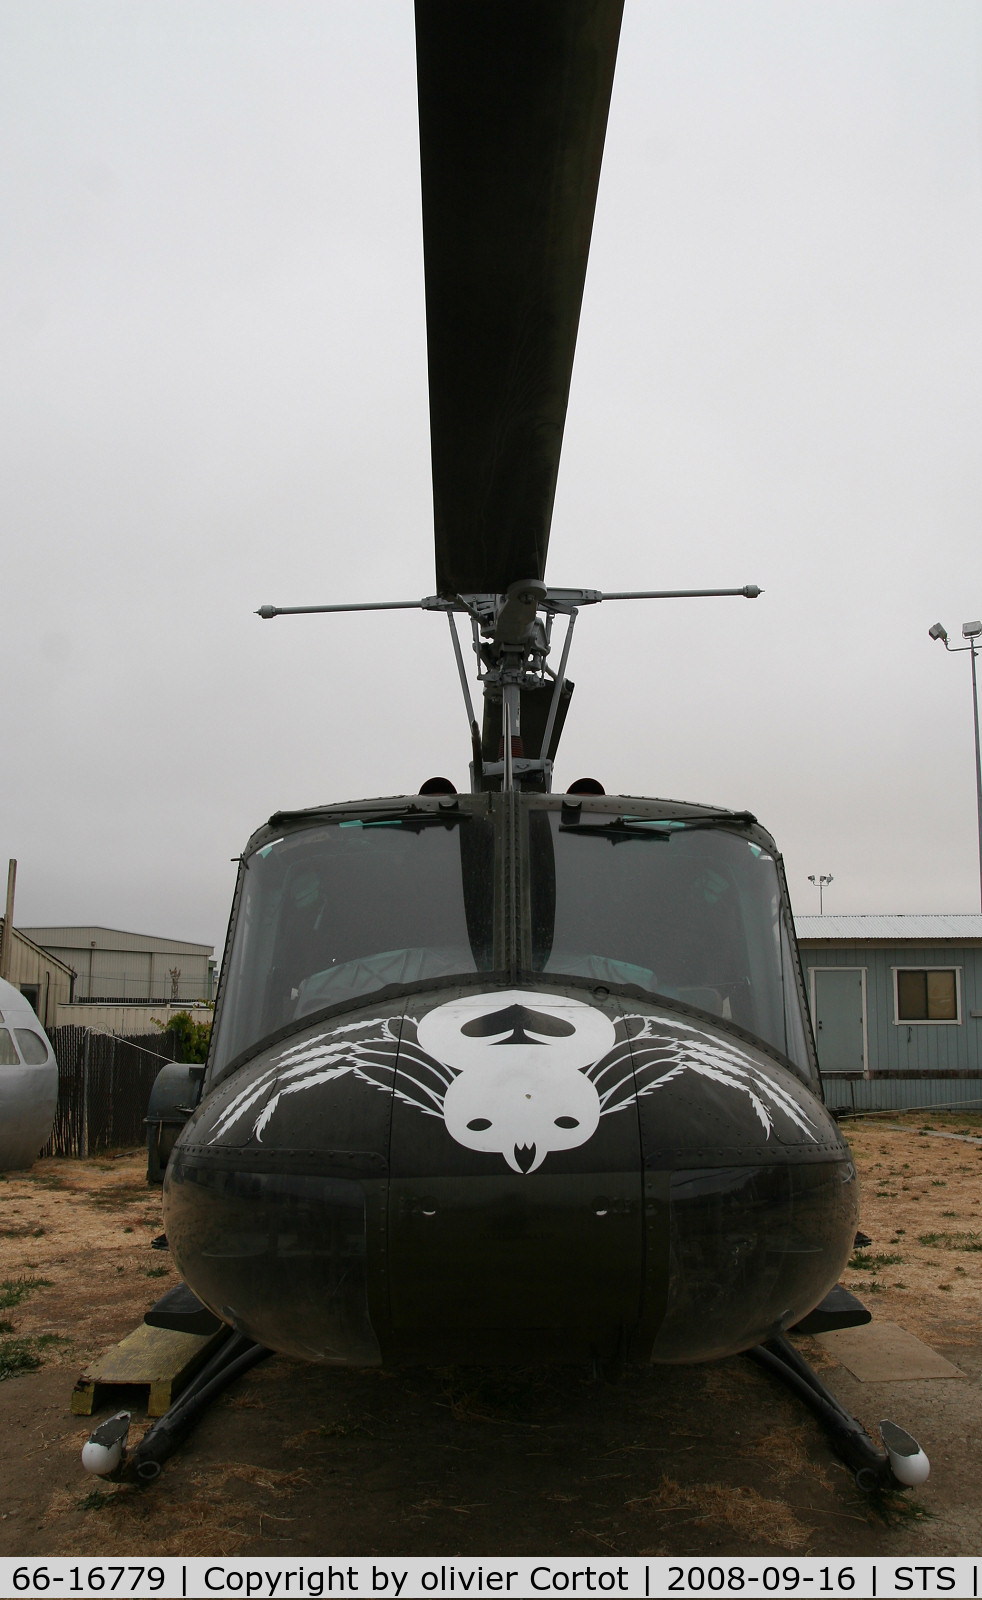 66-16779, 1966 Bell UH-1H Iroquois C/N 8973, spider on the nose